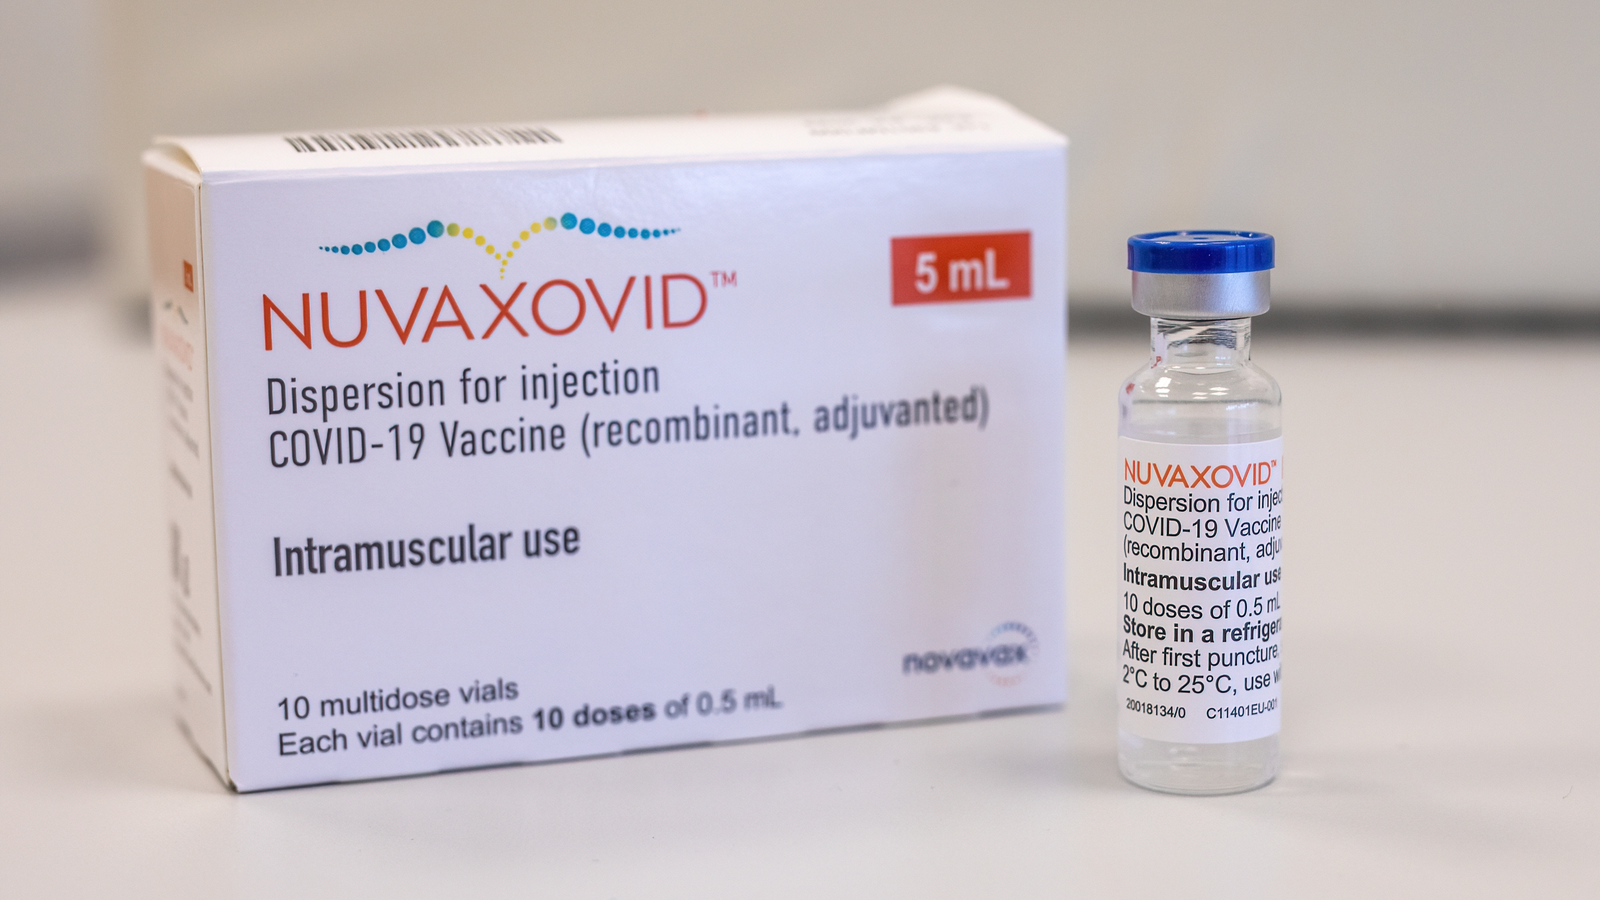 Novavax (NVAX Stock) Covid-19 vaccine Nuvaxovid; Original vaccine vial standing right next to the box in front of white background